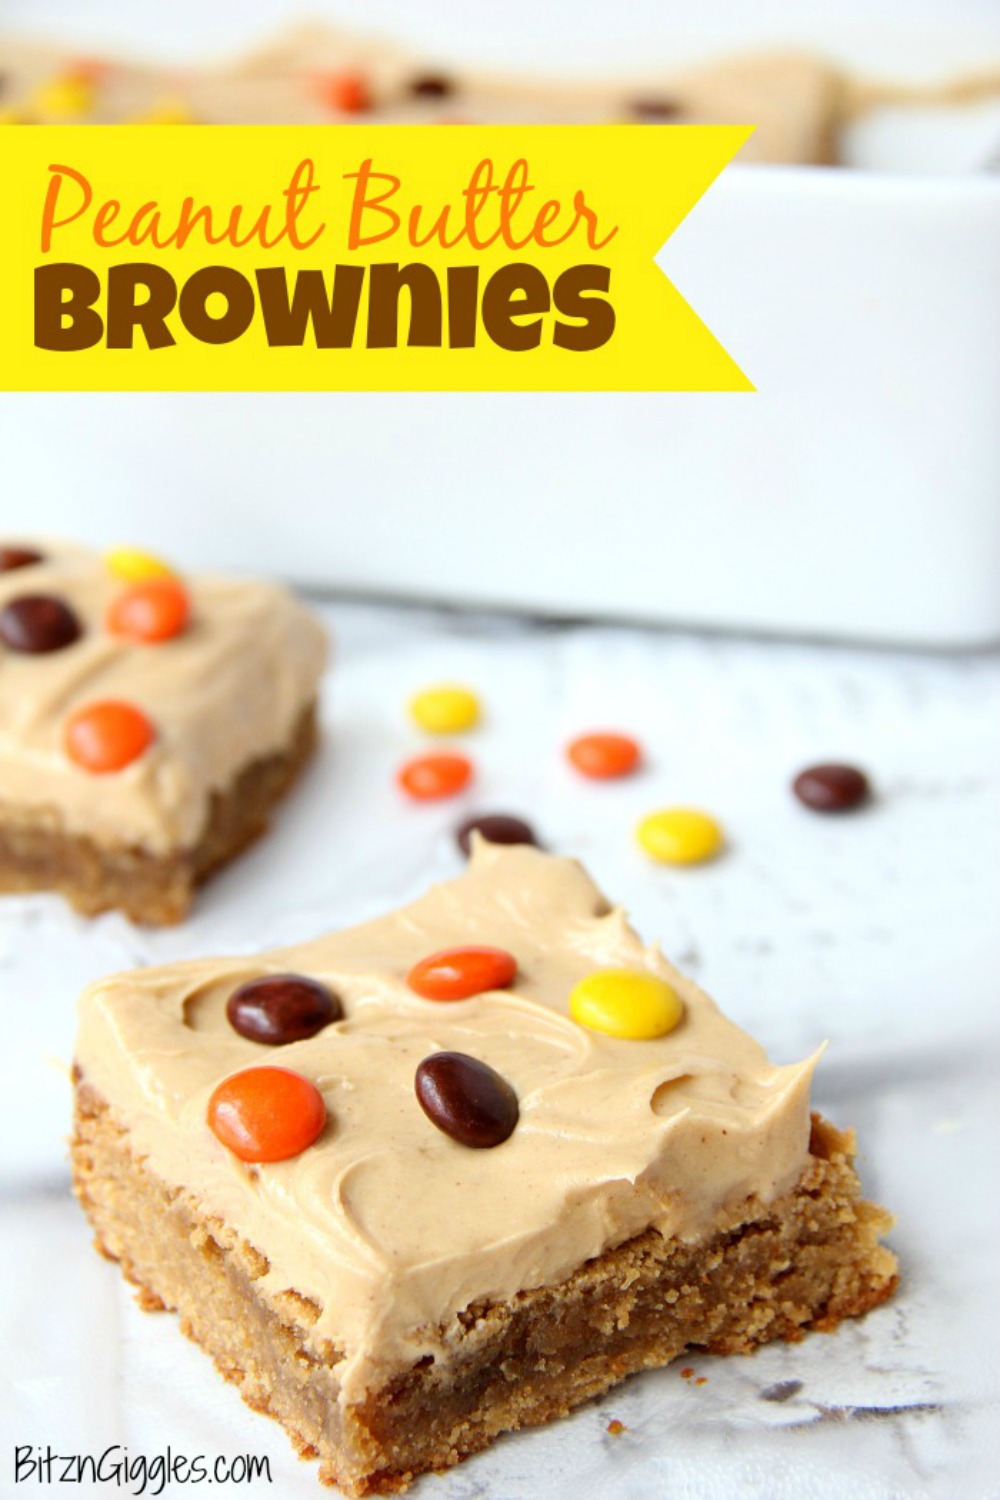 Peanut Butter Brownies – For the peanut butter lovers! Moist, cake-like peanut butter brownies topped with light and fluffy peanut butter frosting! 